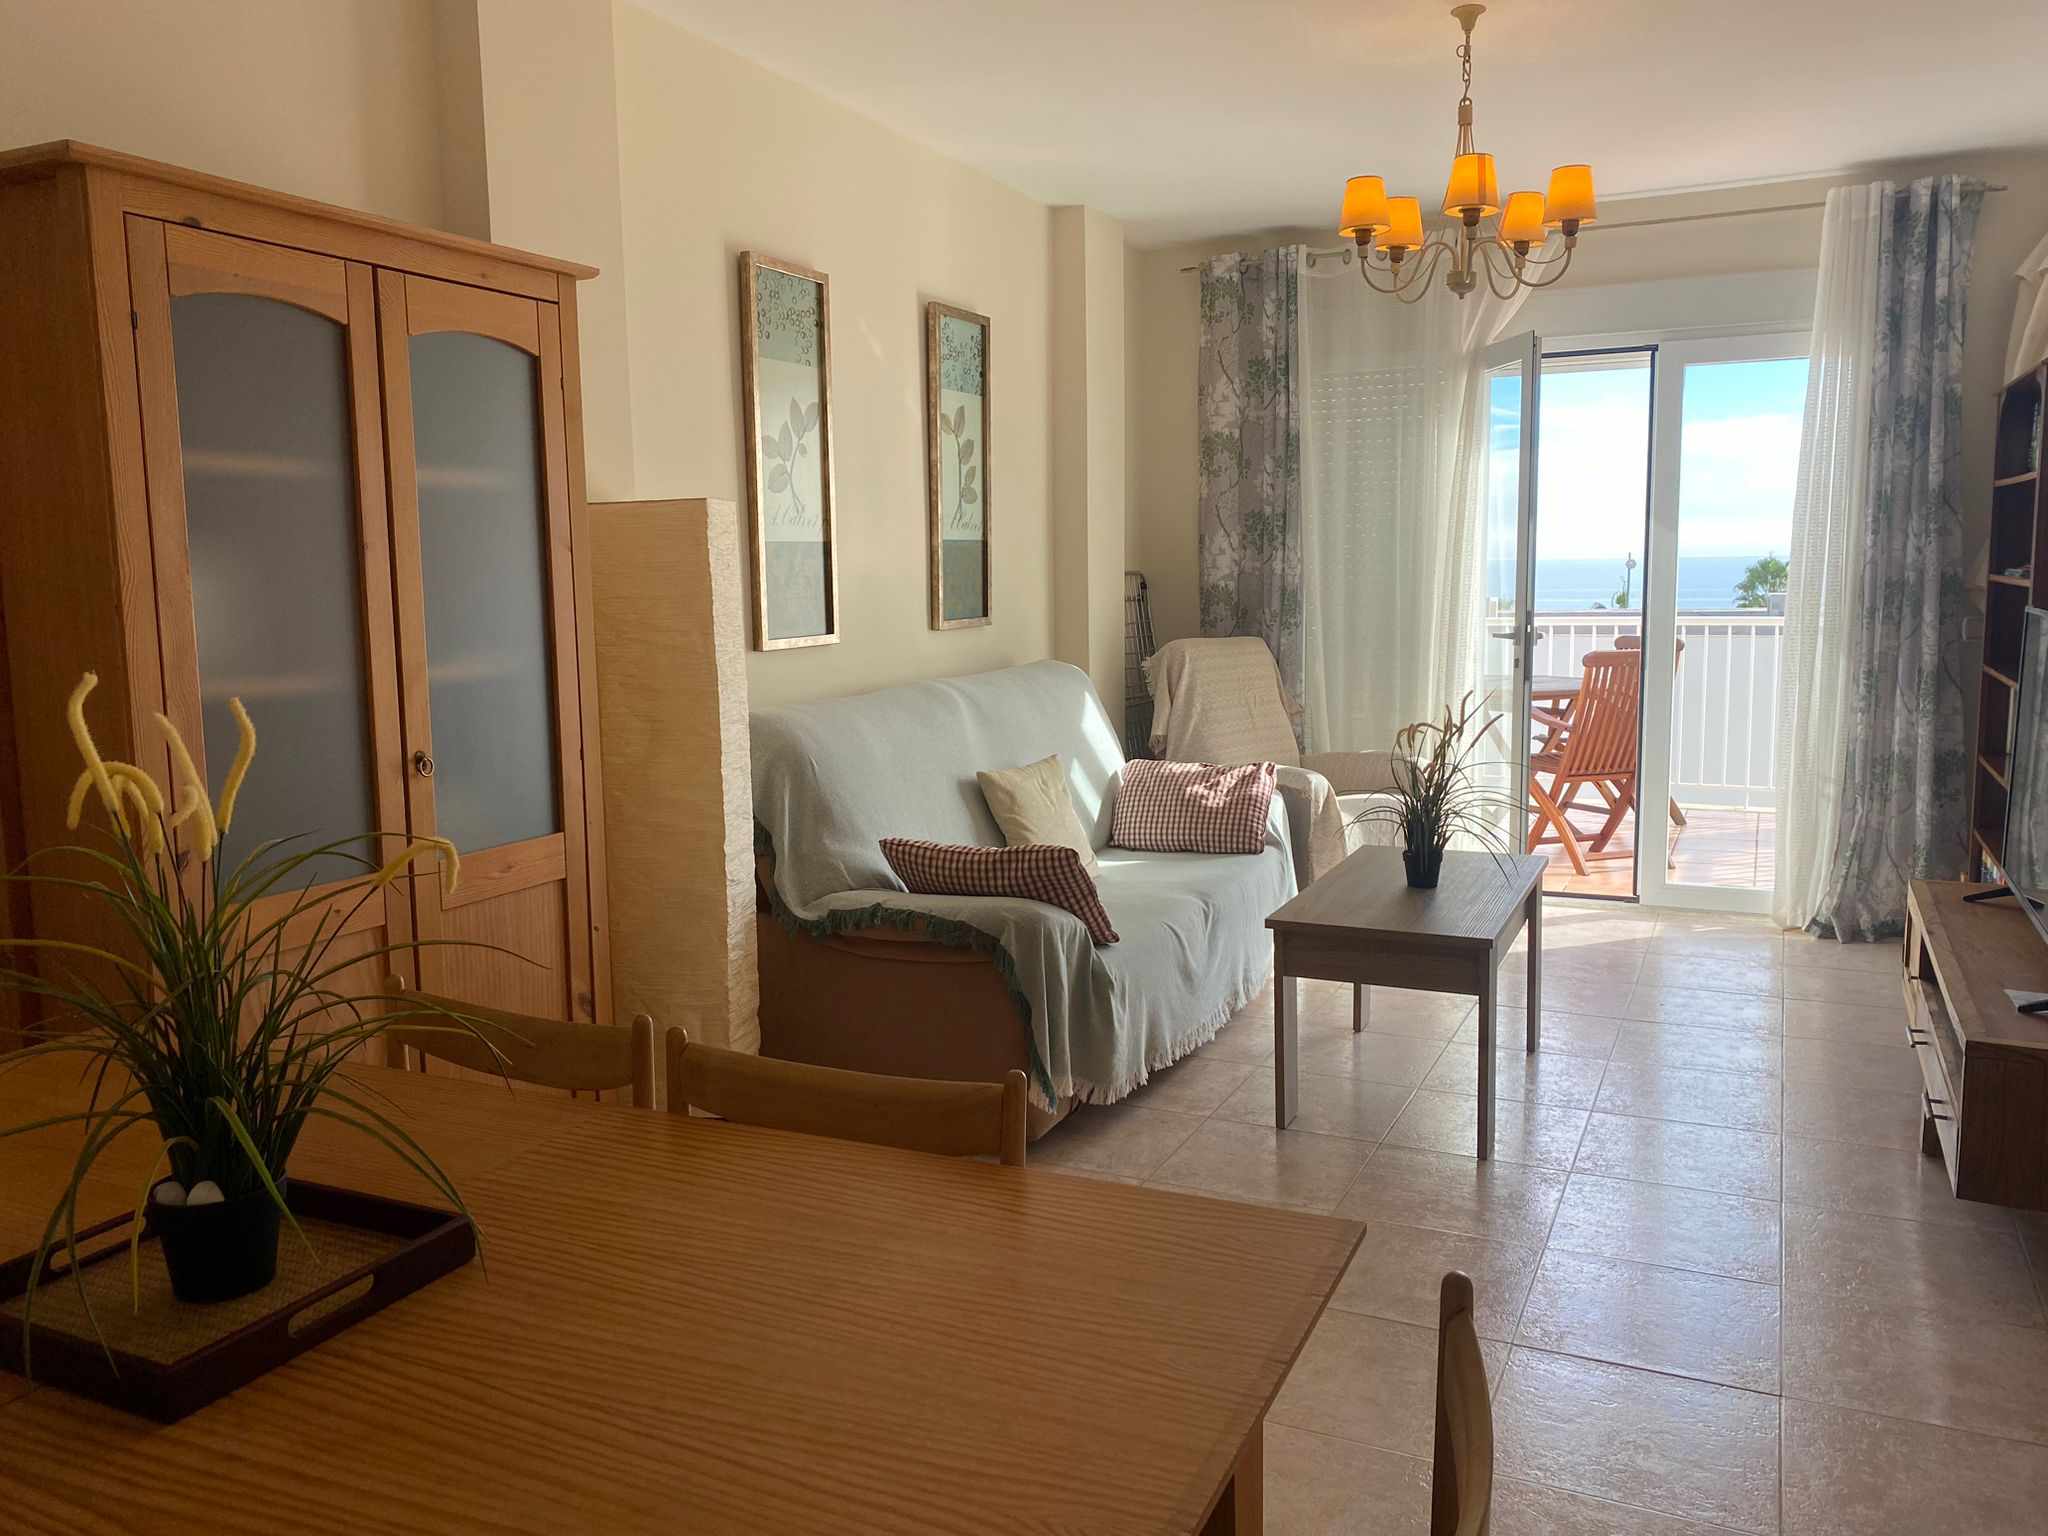 Beautiful apartment located close to bars/shops: Apartment for Rent in Mojácar, Almería